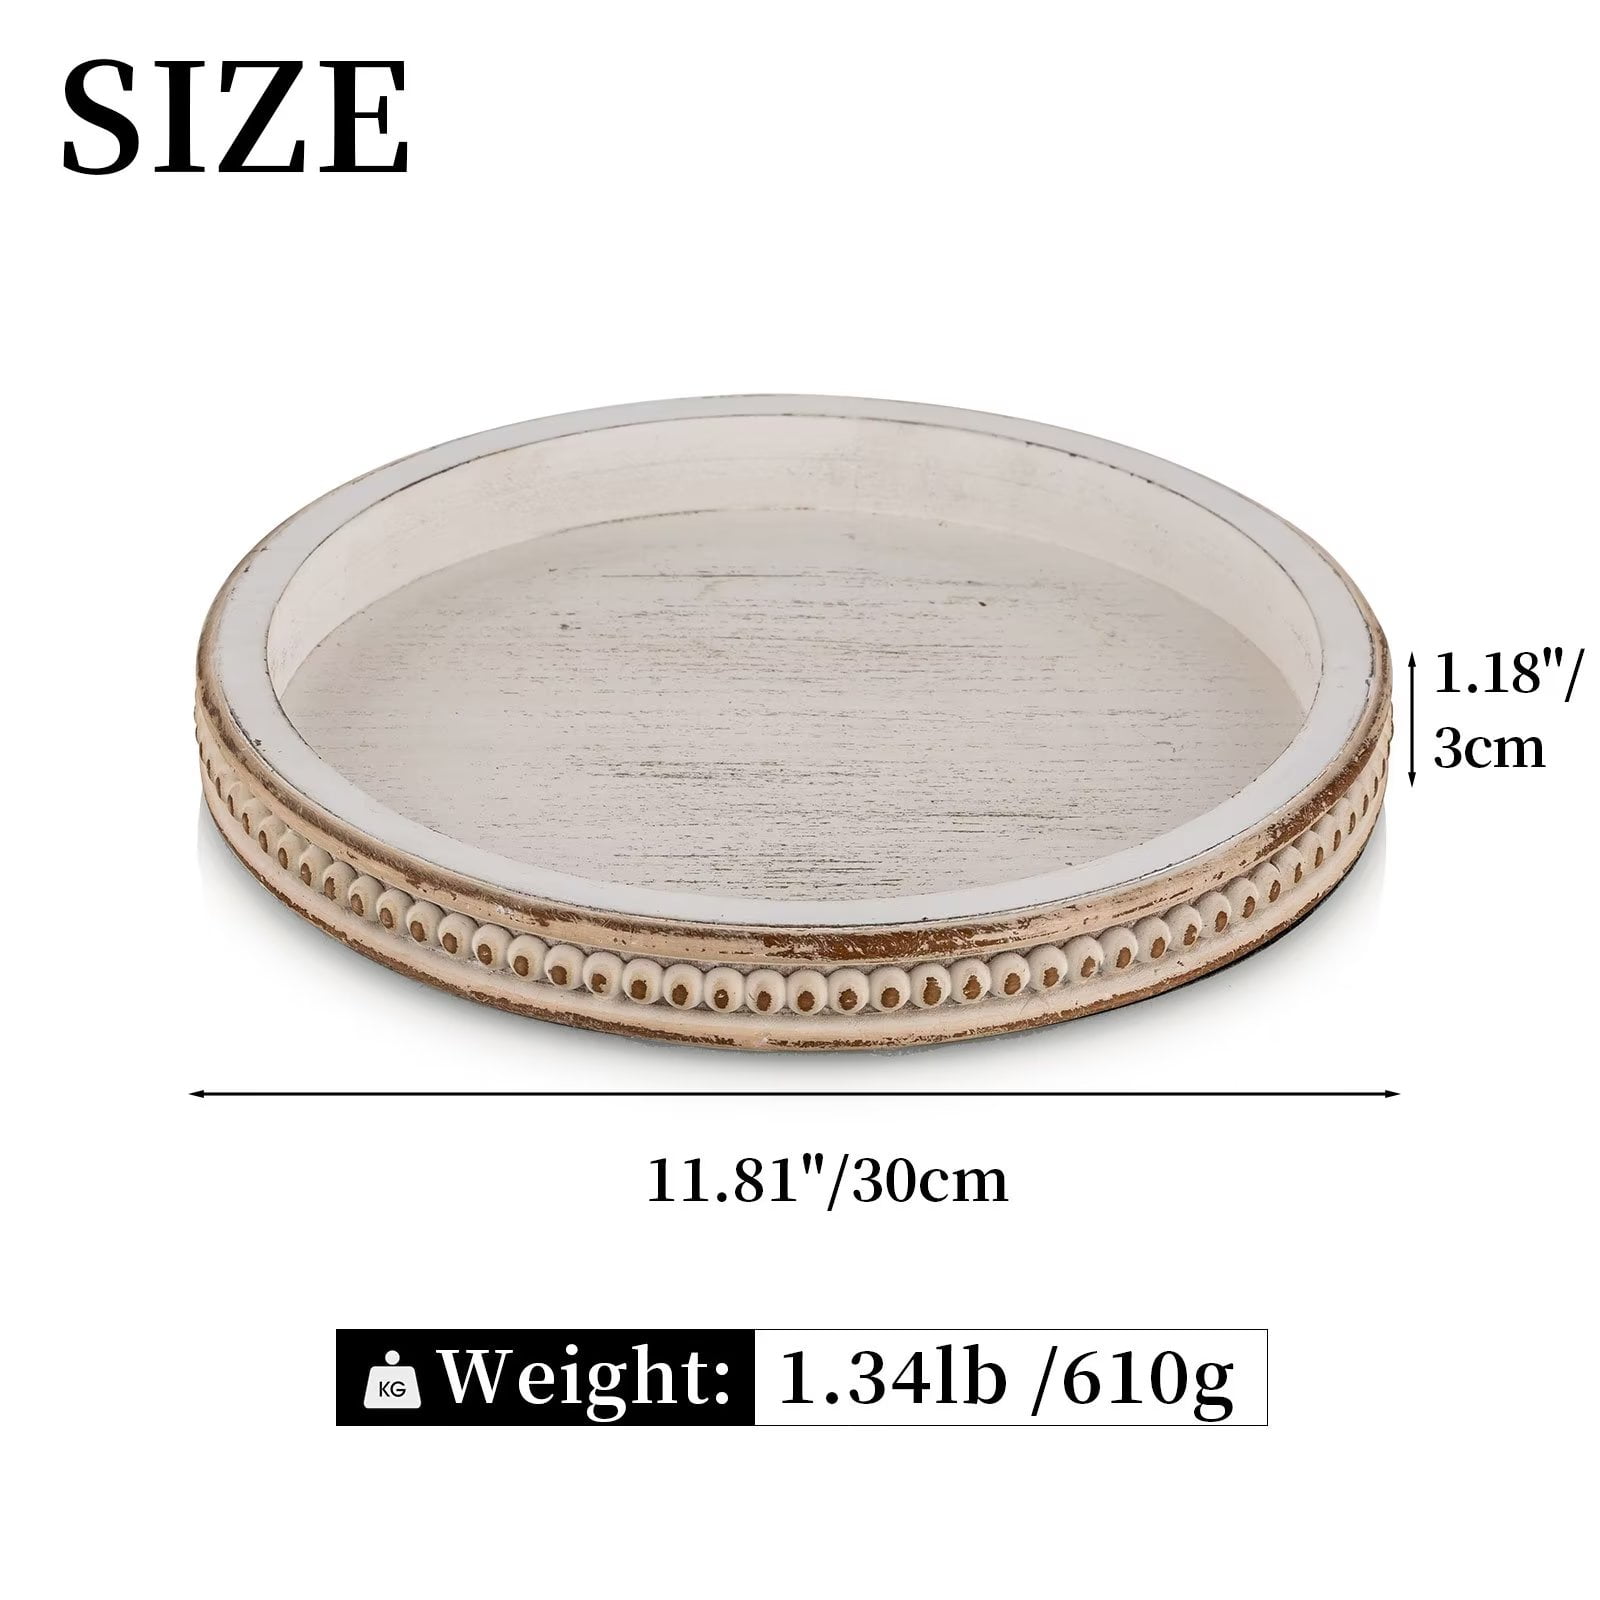 Hanobe Wood Round Tray 11 inch Rustic Decorative Small Tray for Table Decor,Whitewashed, Size: Diam: 11.61, Height: 1.18